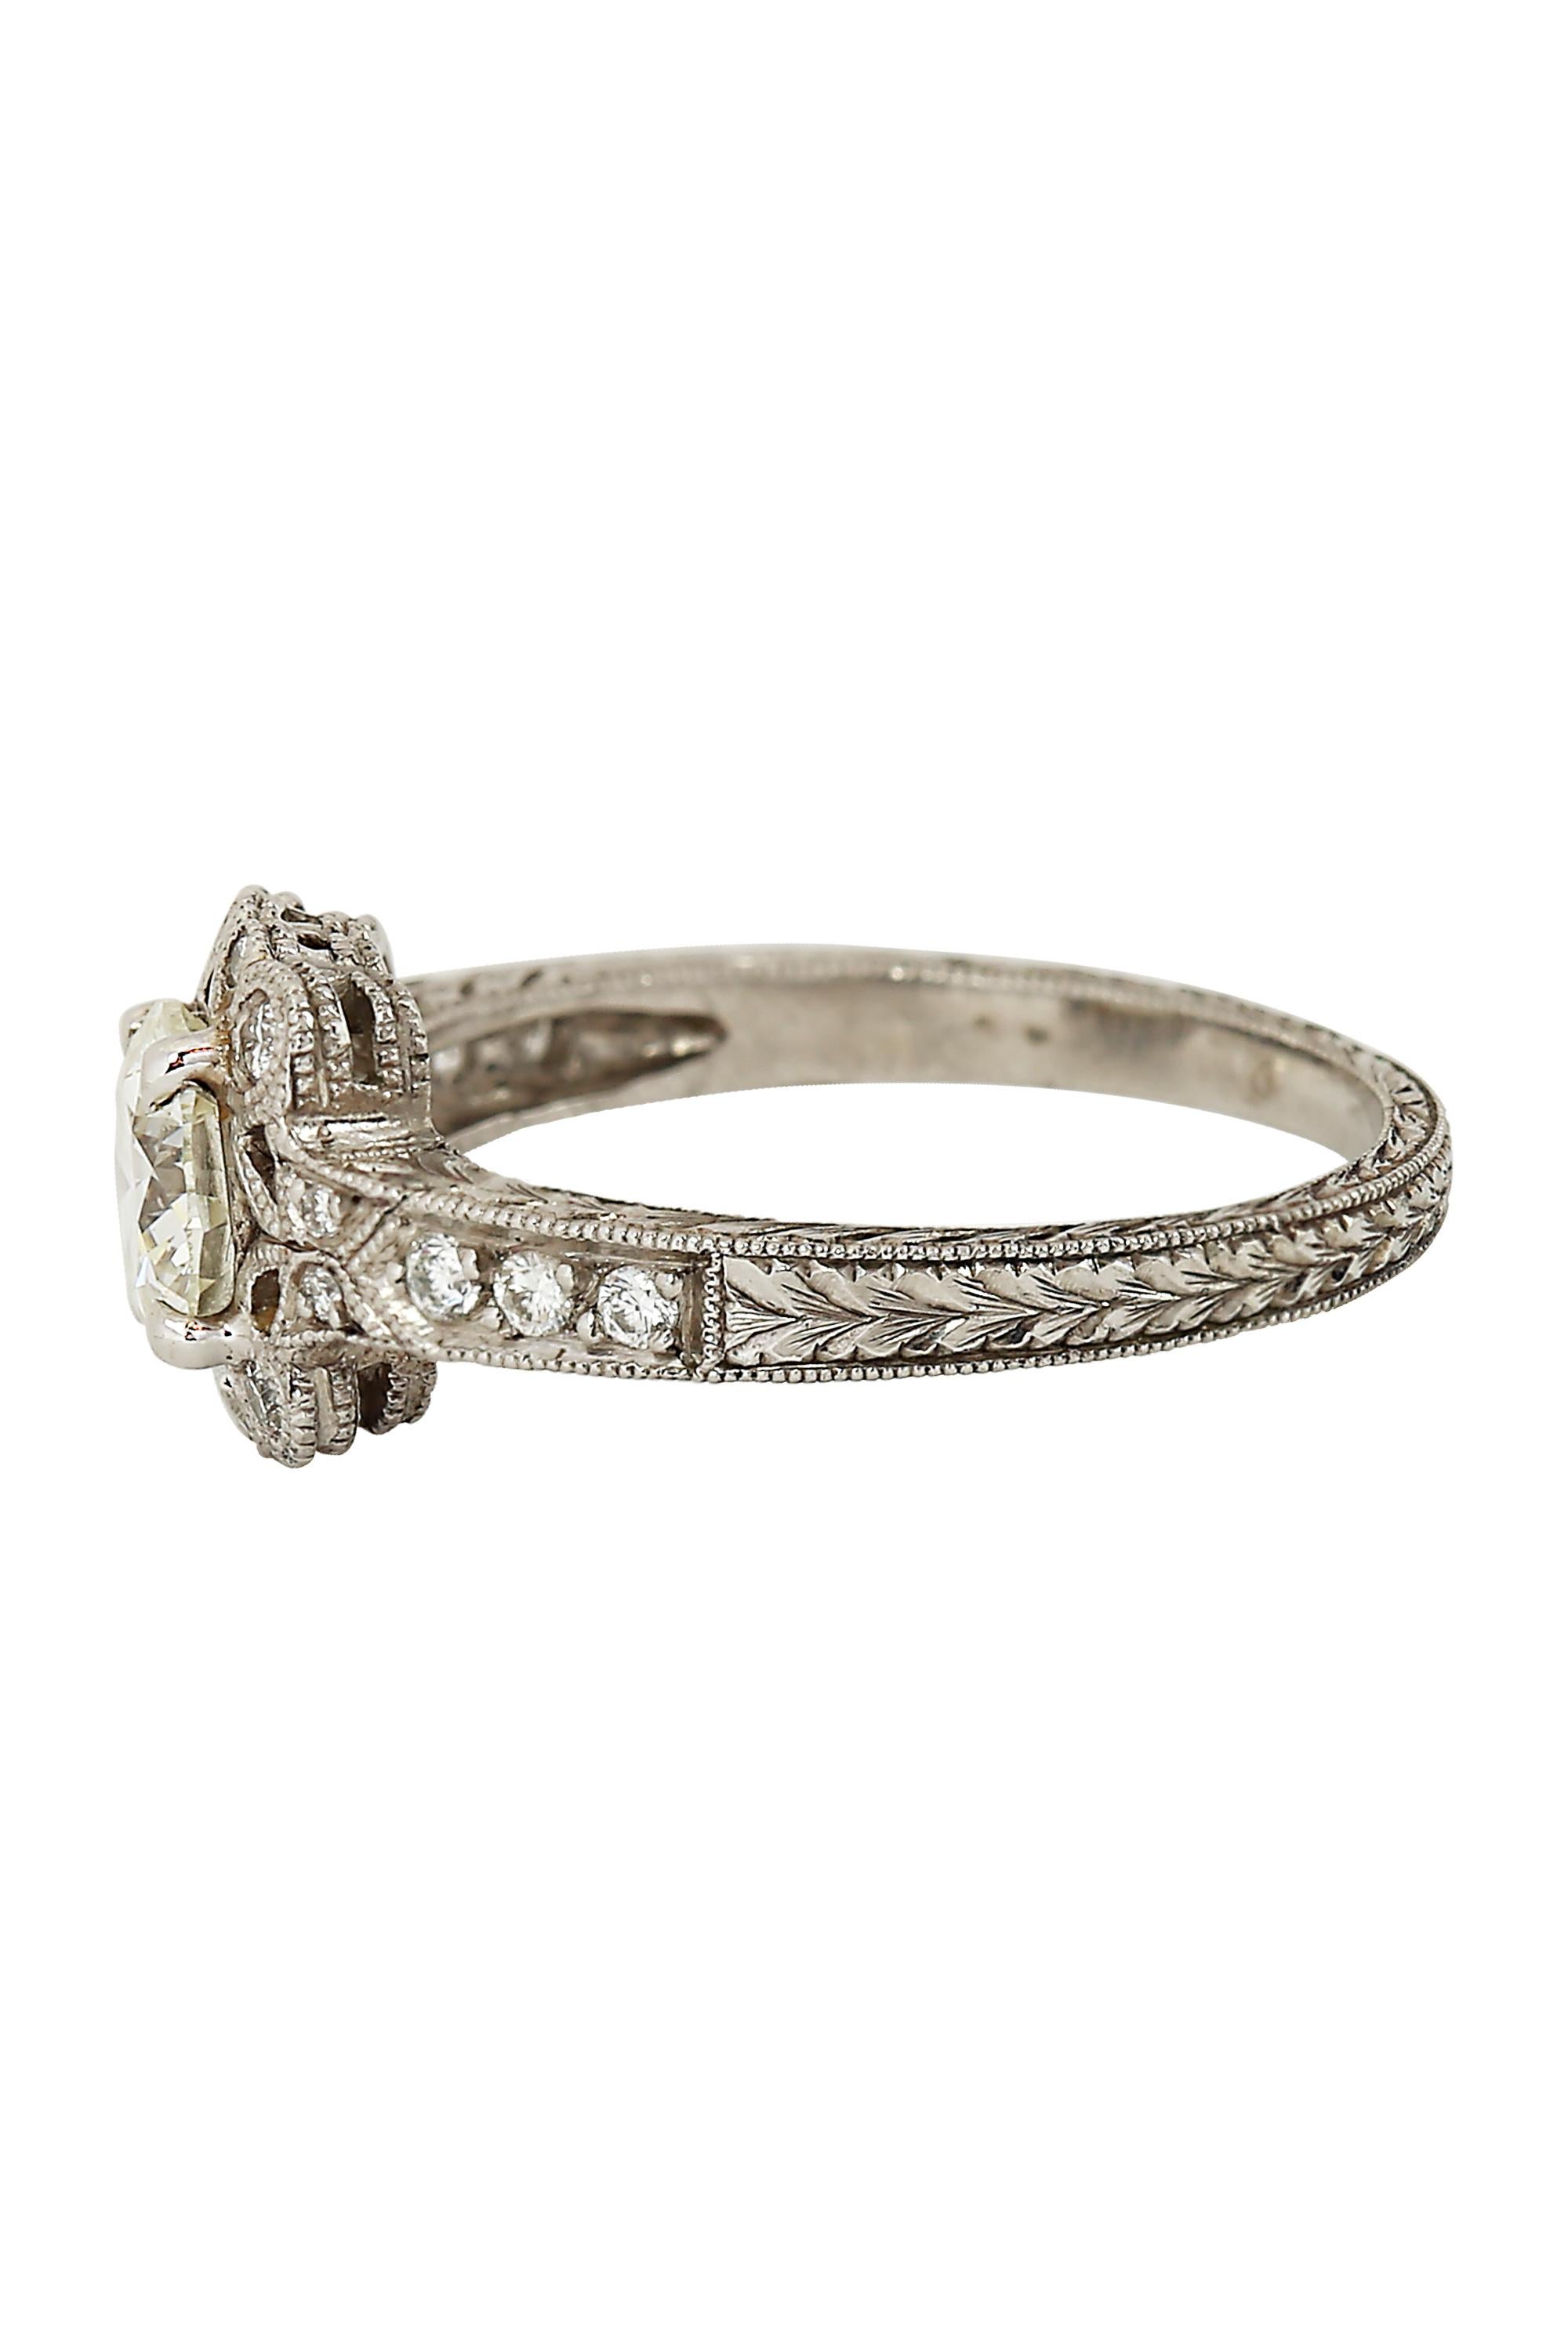 A consummate Art Deco sparkler, this ring features a  gorgeous round brilliant cut diamond weighing approximately 1.10 carats in a refined diamond and platinum mounting with all the finely engraved and milgrained detailing so representative of this